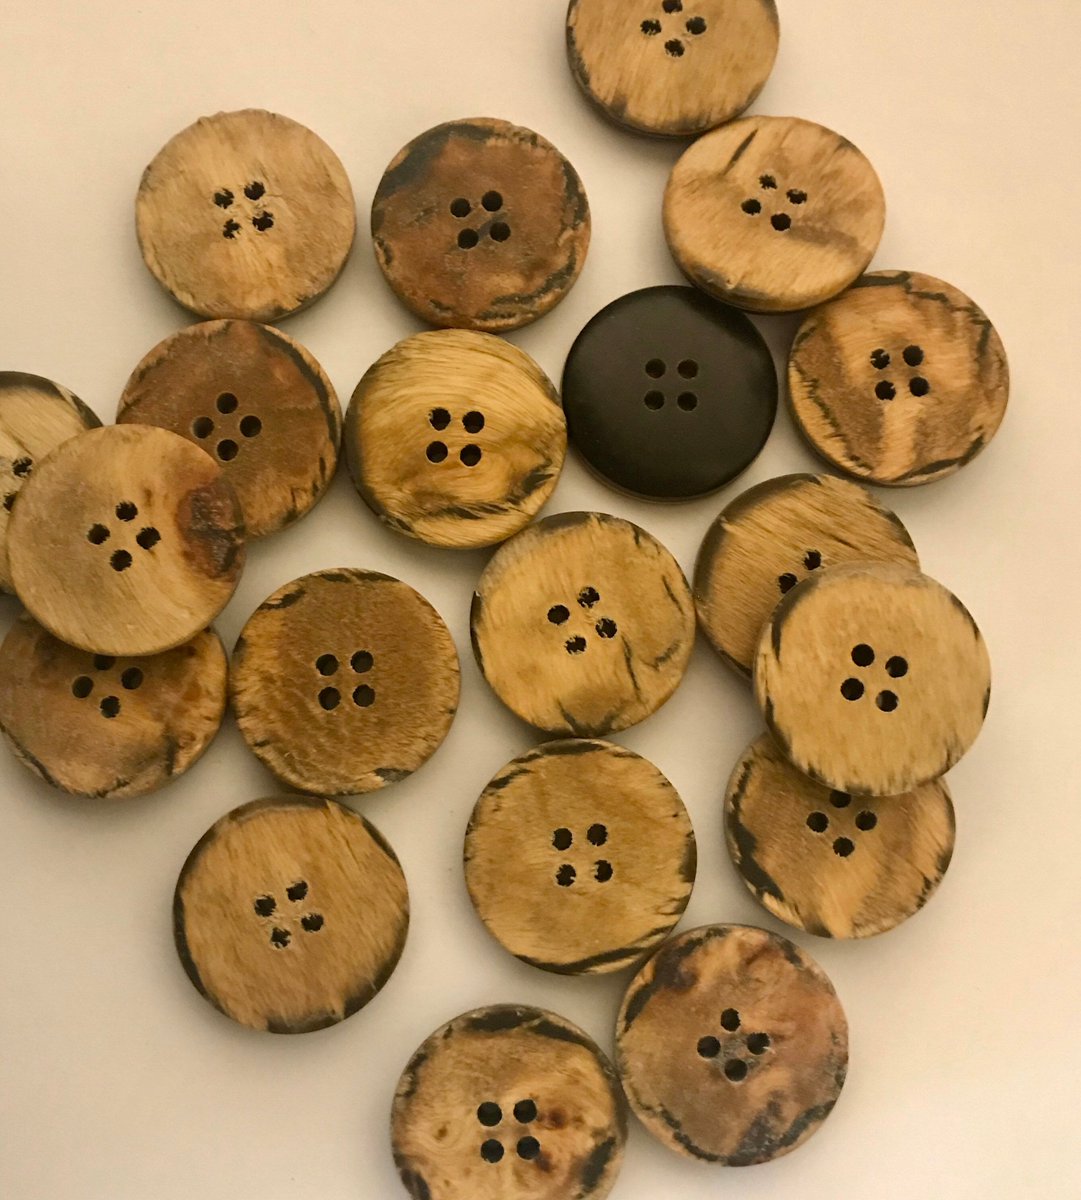 20 Vintage 23mm round 4 holes  wood buttons lot of 20 by BySupply tuppu.net/15feb3c3 #bysupply #Etsy #23mmButtons